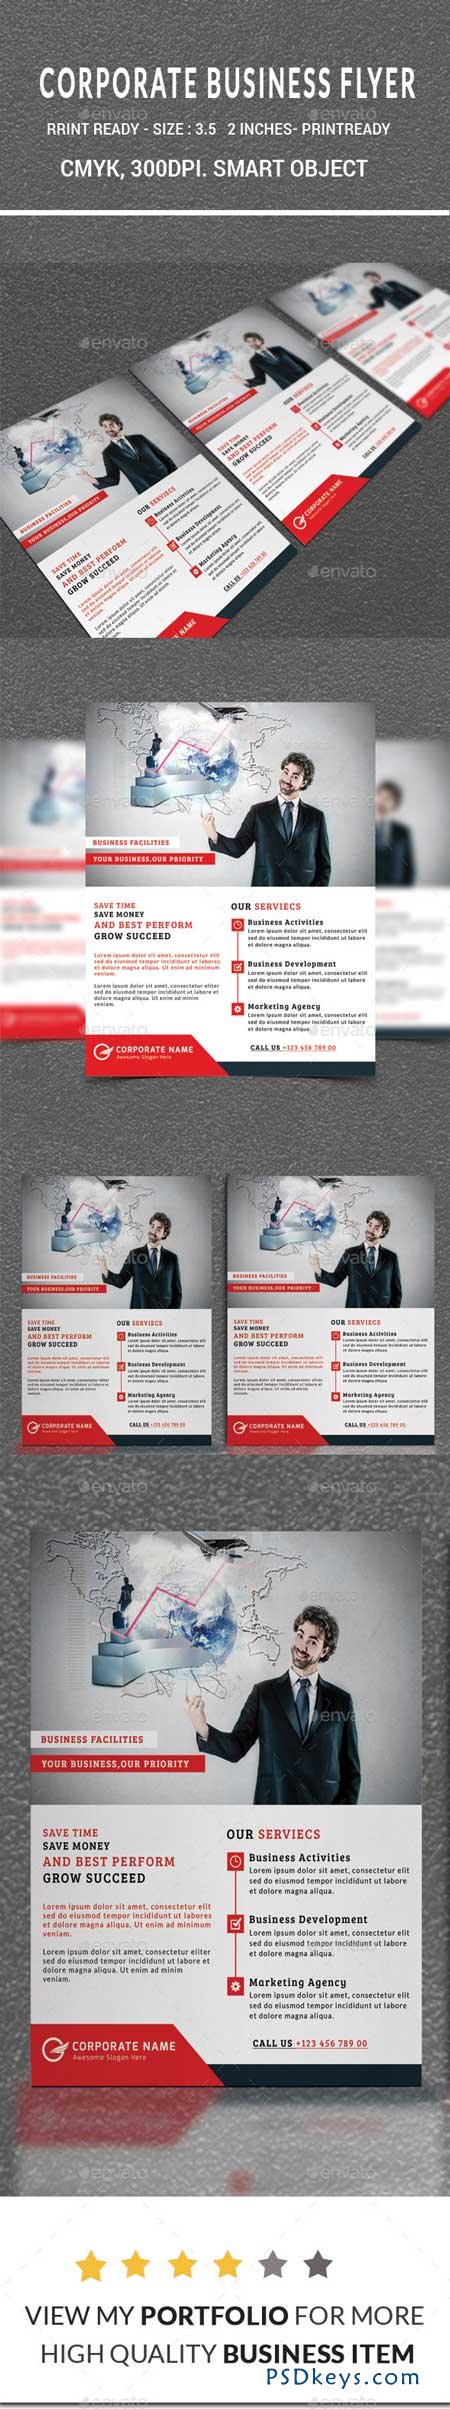 Corporate Business Flyer 9433163